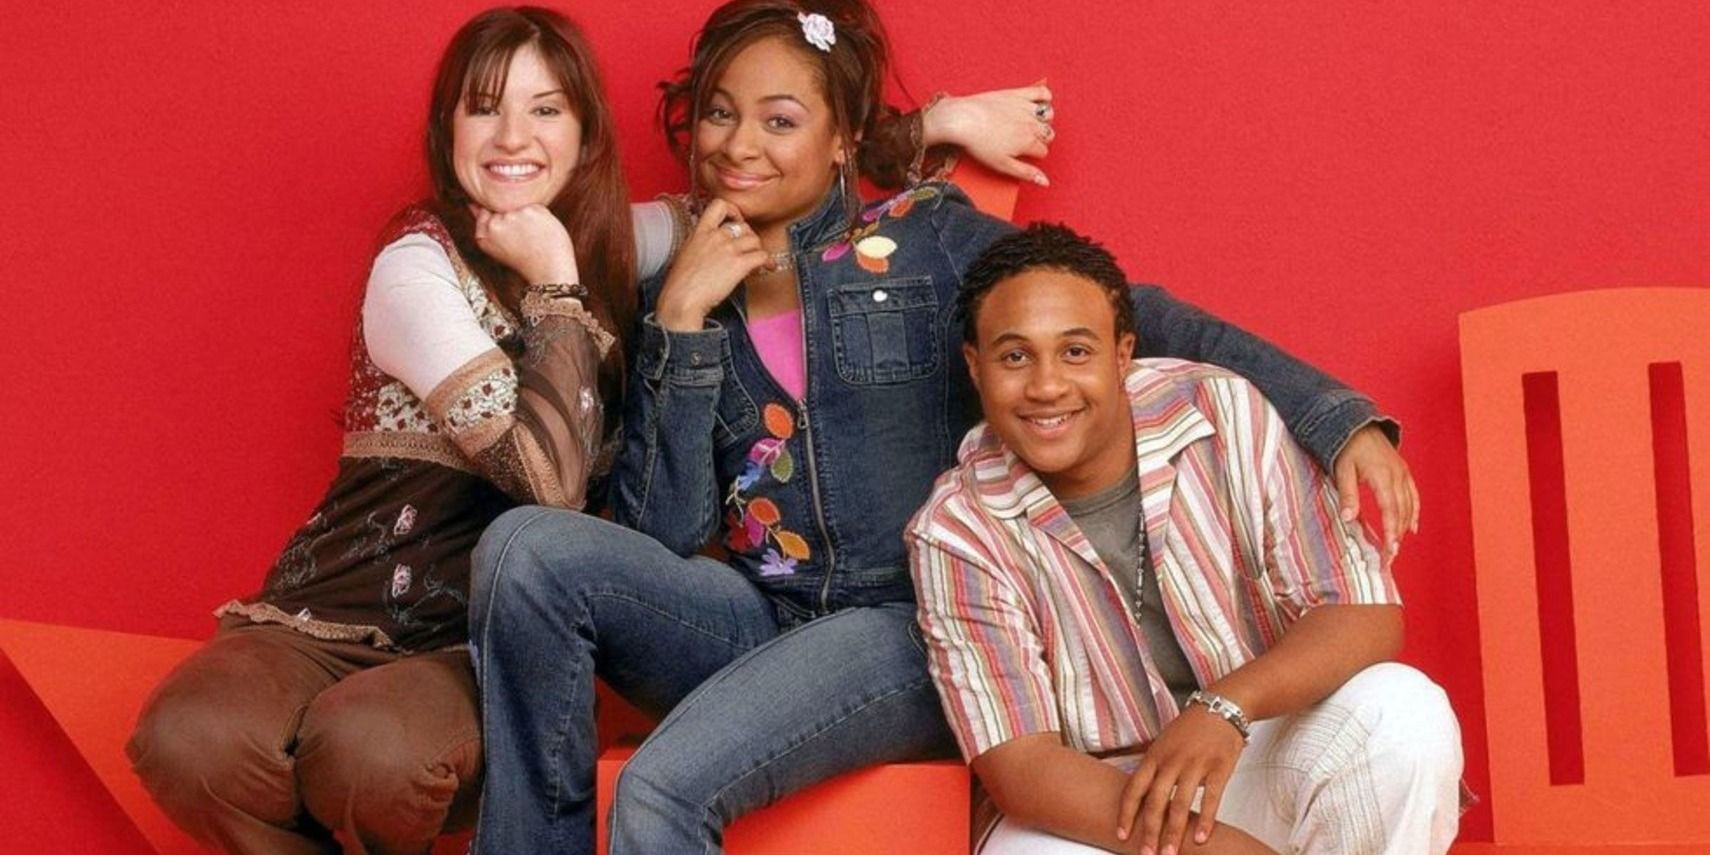 Cast of That's So Raven in front of a red background.